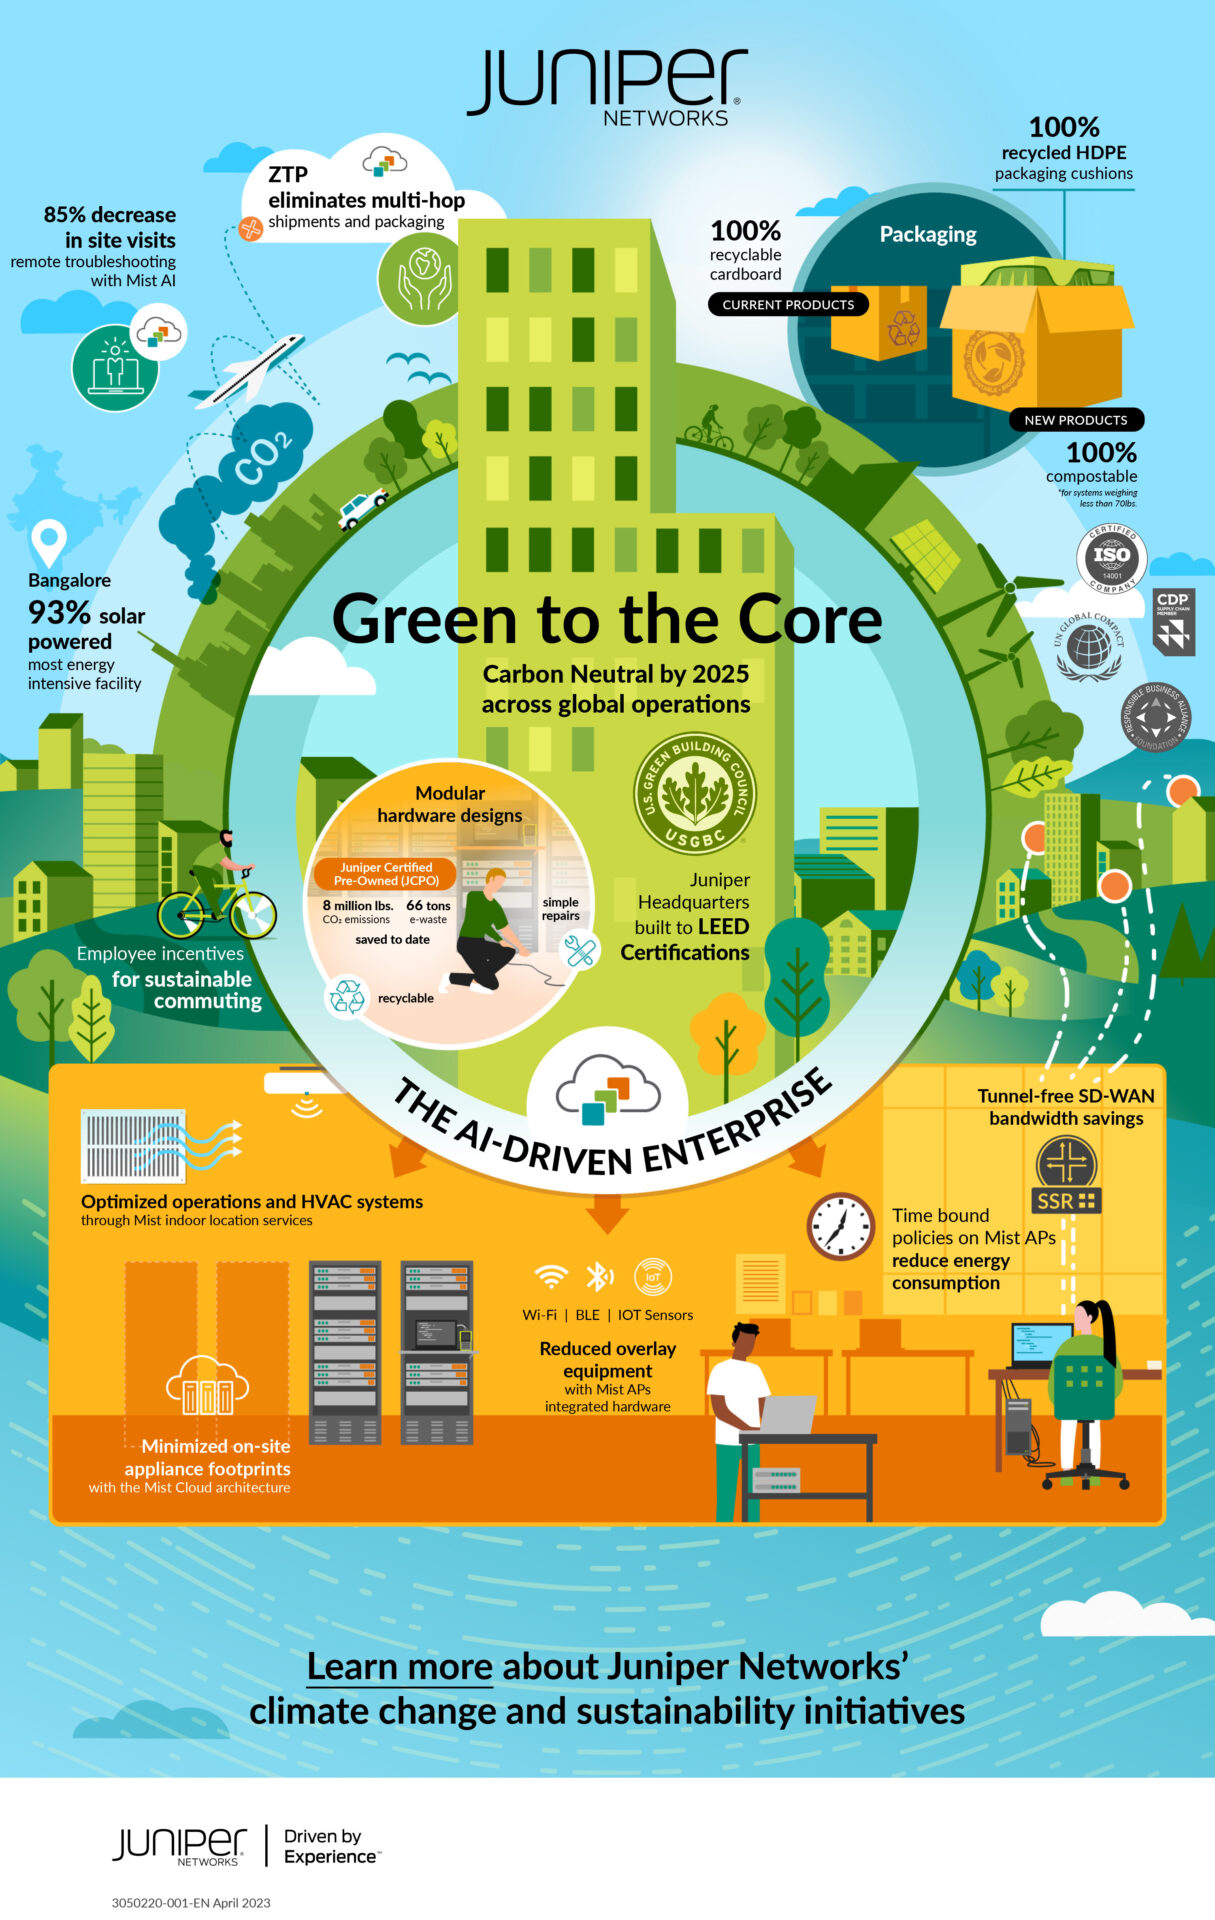 A Juniper sustainability infographic. A building is in the middle with various sustainability initiatives around it.